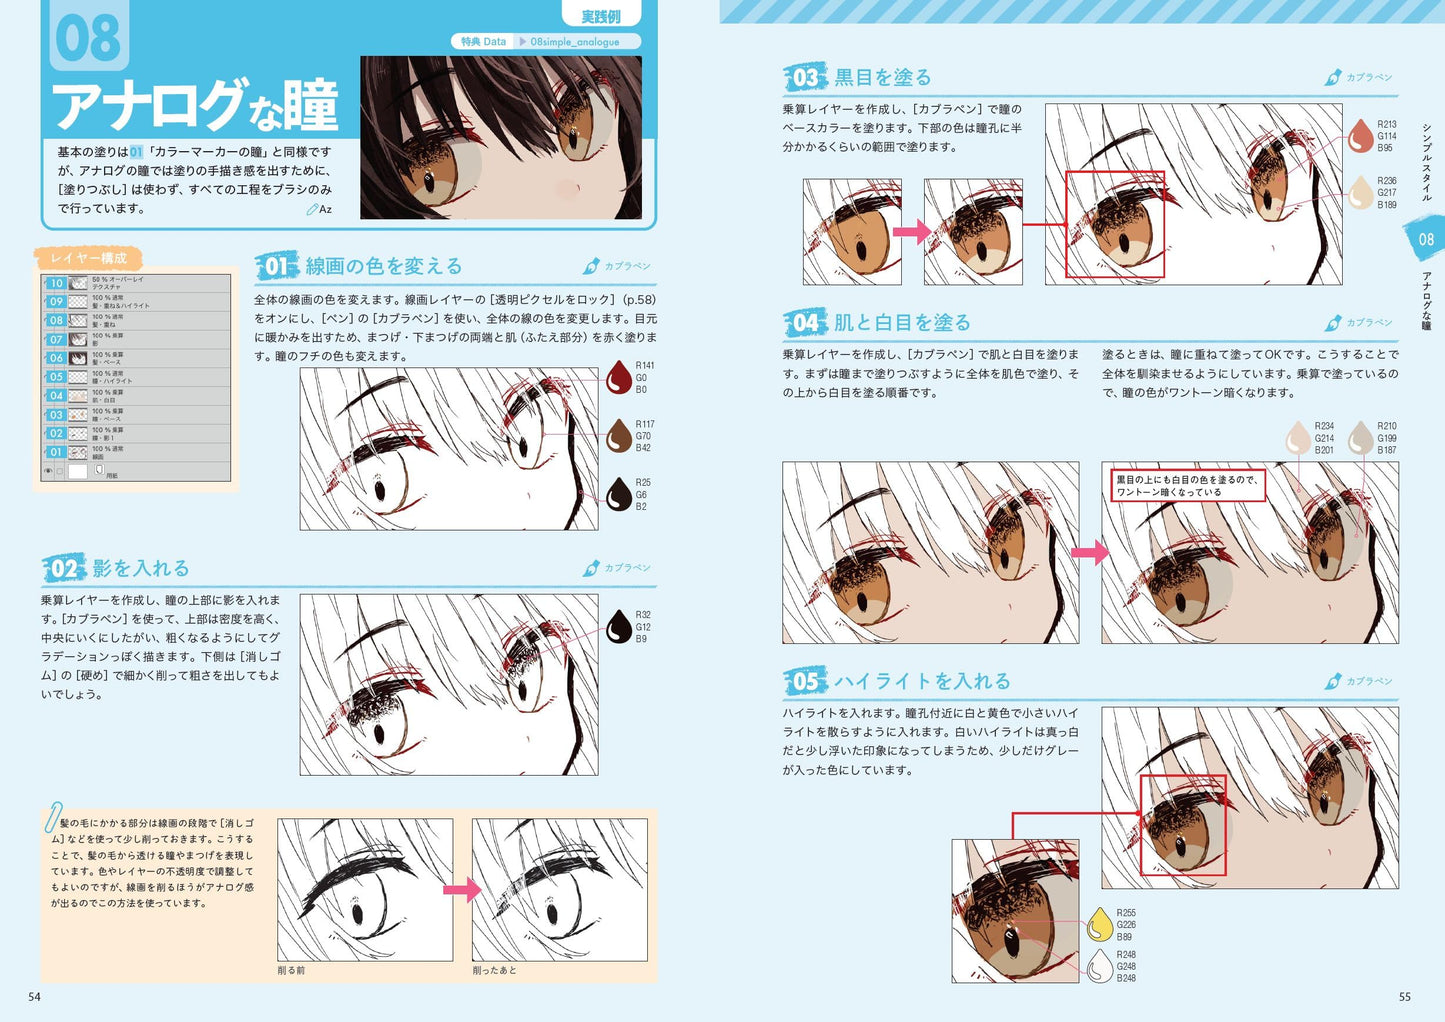 How To Draw Eyes Encyclopedia for Digital Illustrations